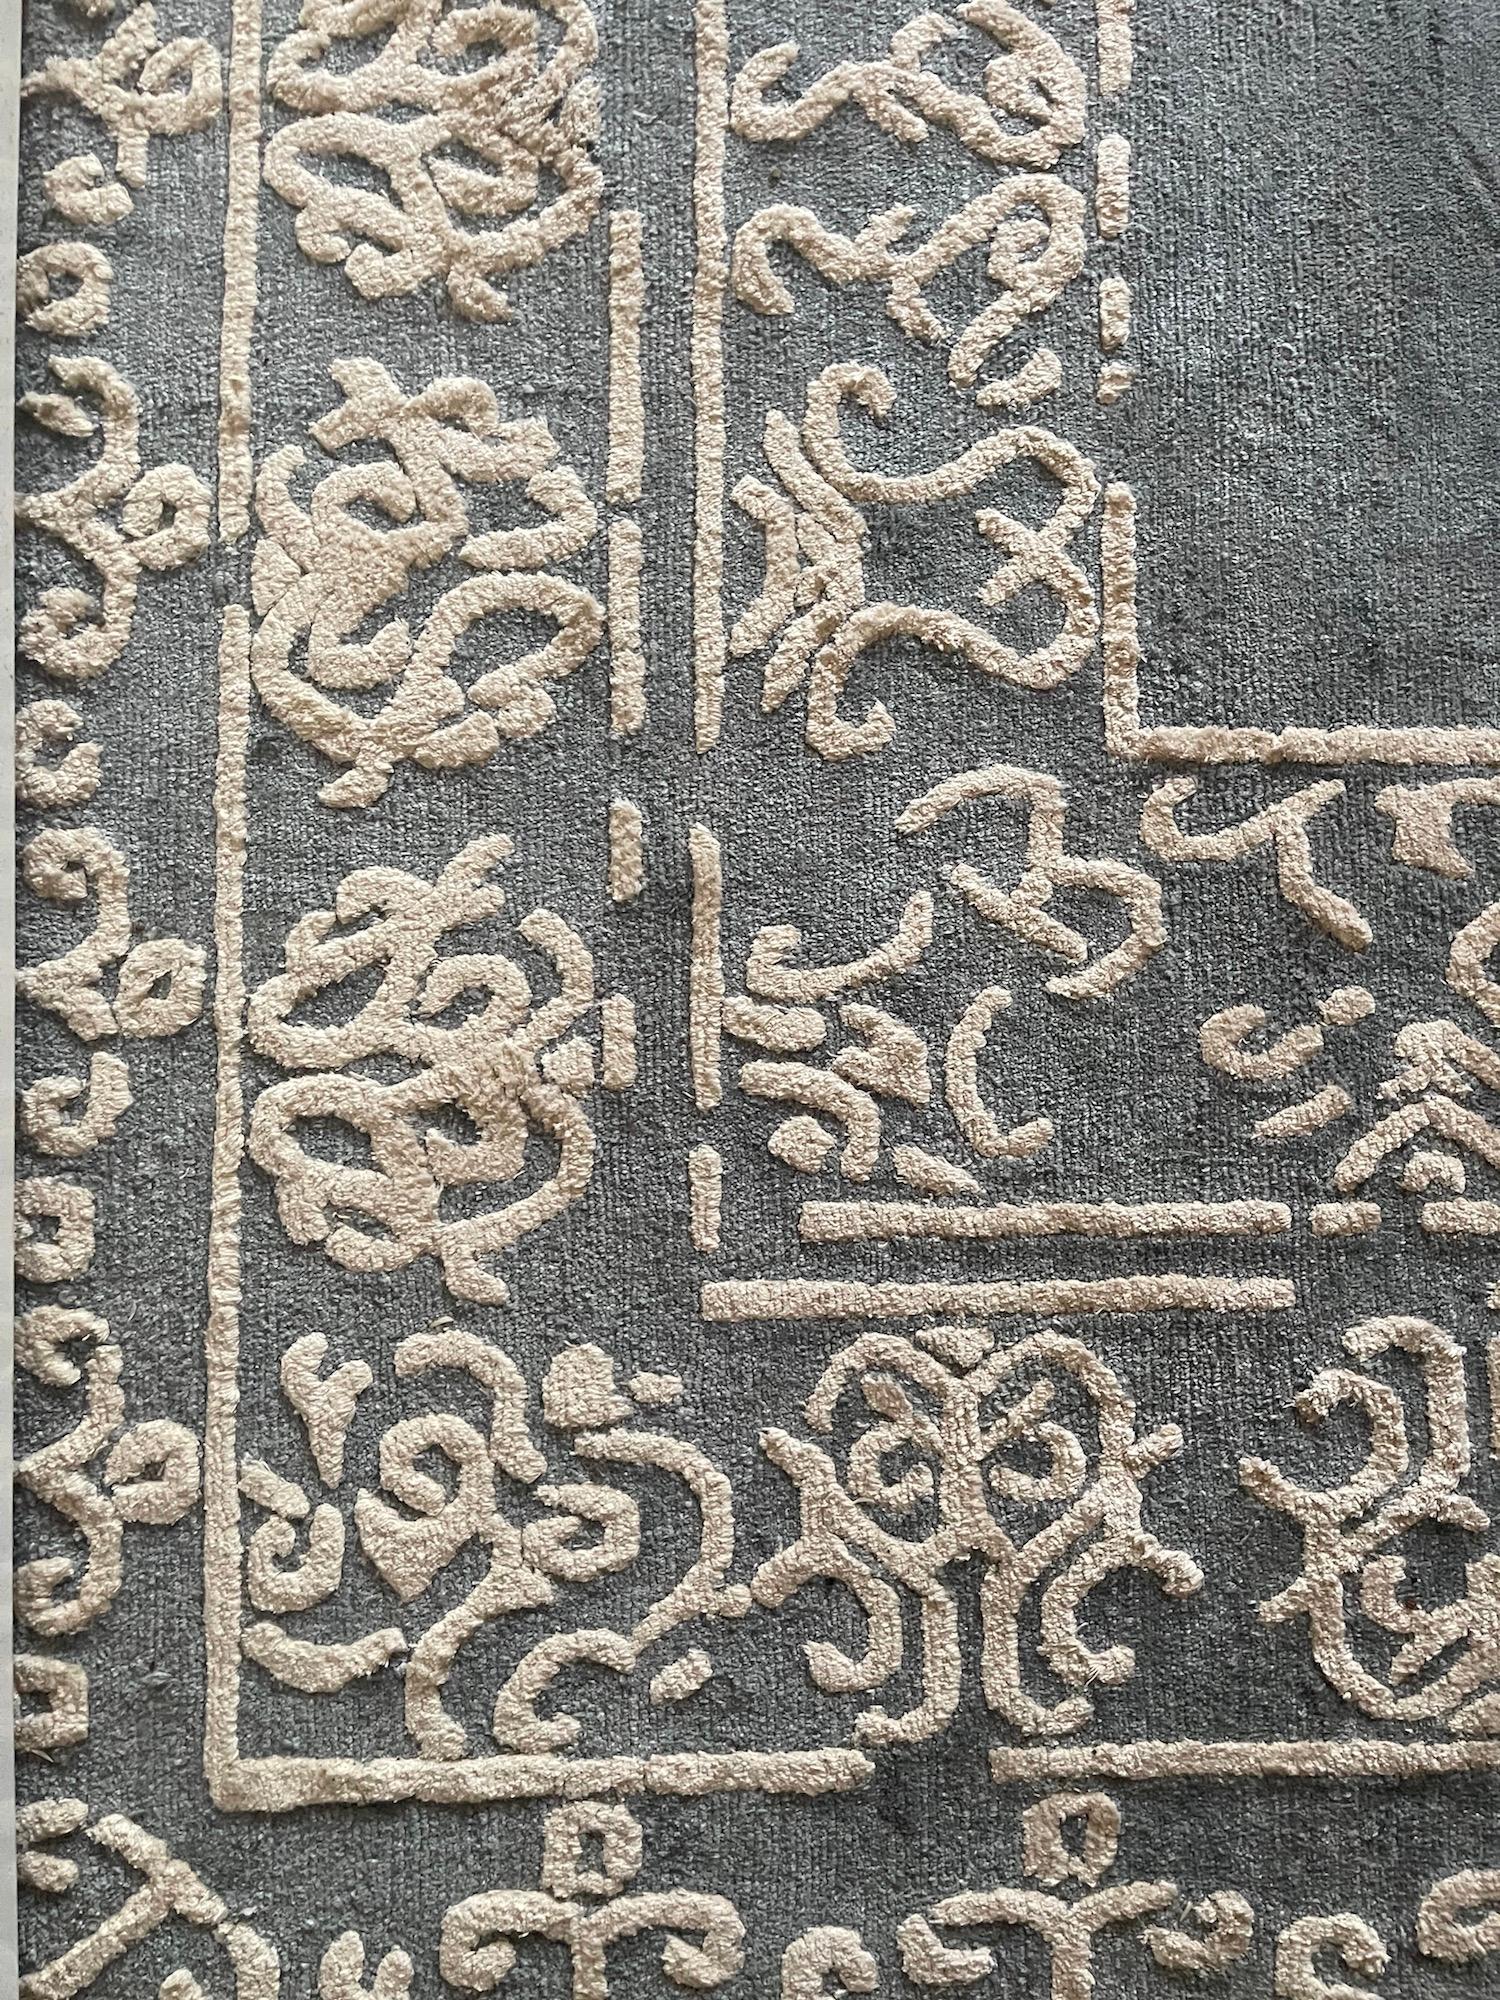 Nepal is known for its high-quality hand-knotted. This rug is made from premium wool, best silk and nettle. The use of high-quality materials and traditional knotting techniques contributes to the durability and beauty of these rug. This rug  is an